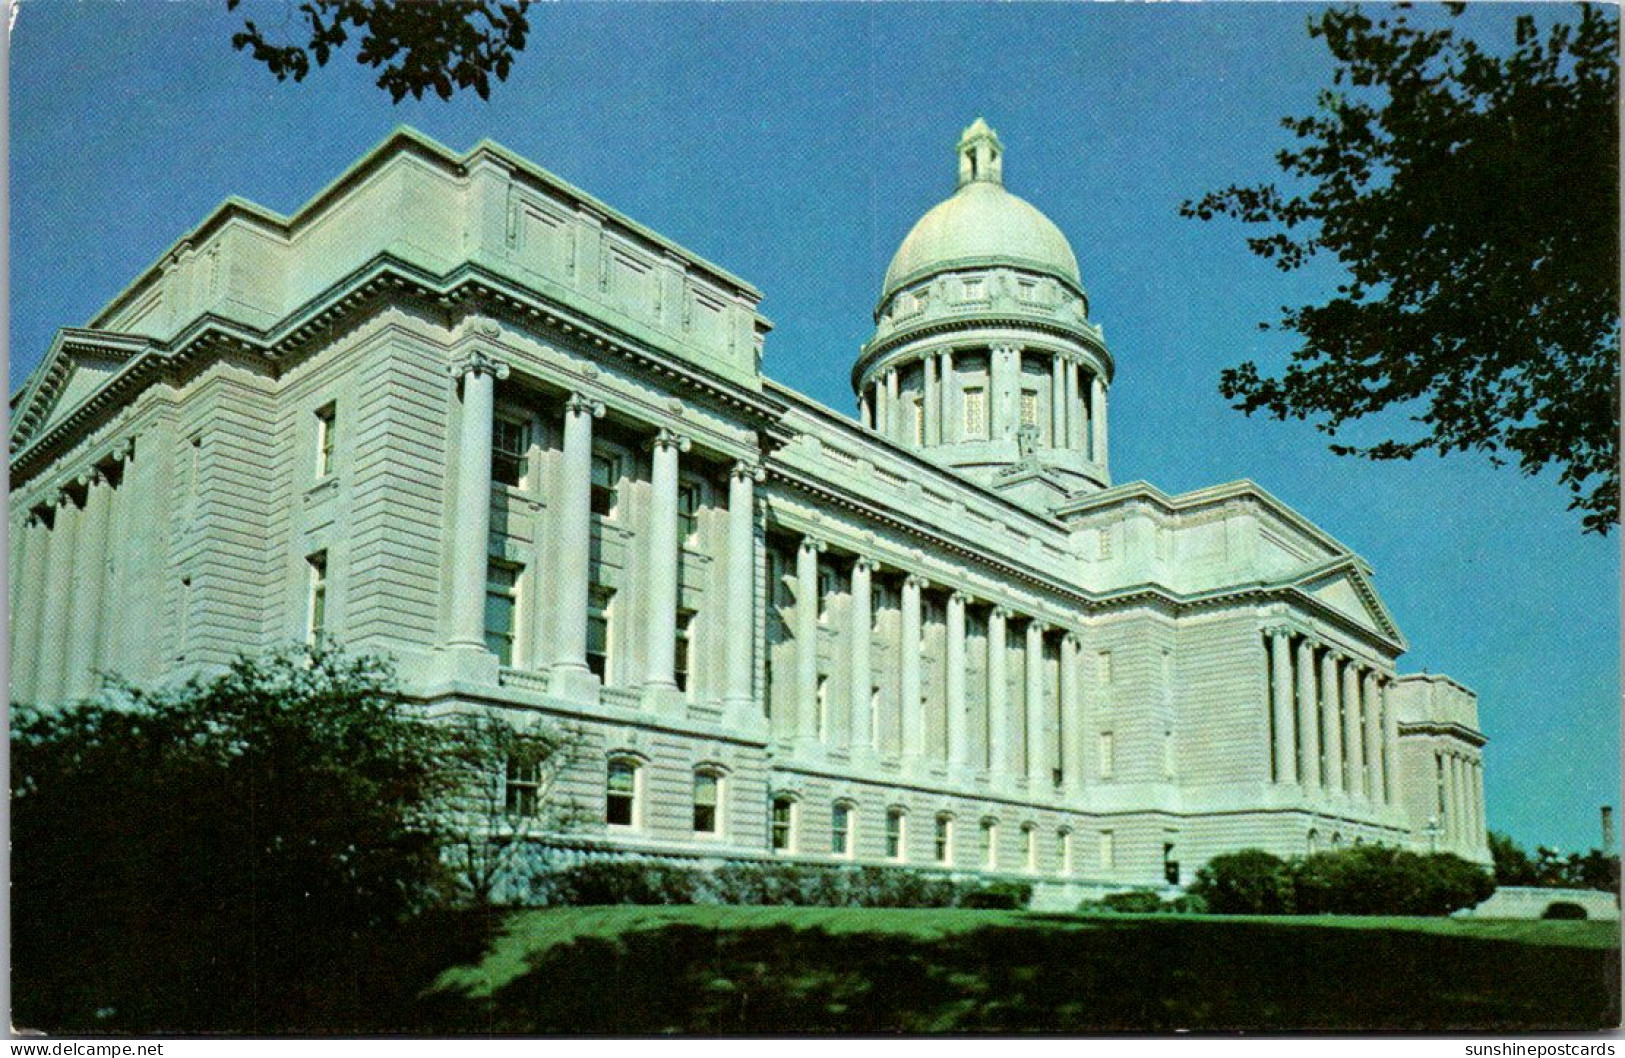 Kentucky Frankfort State Capitol Building - Frankfort